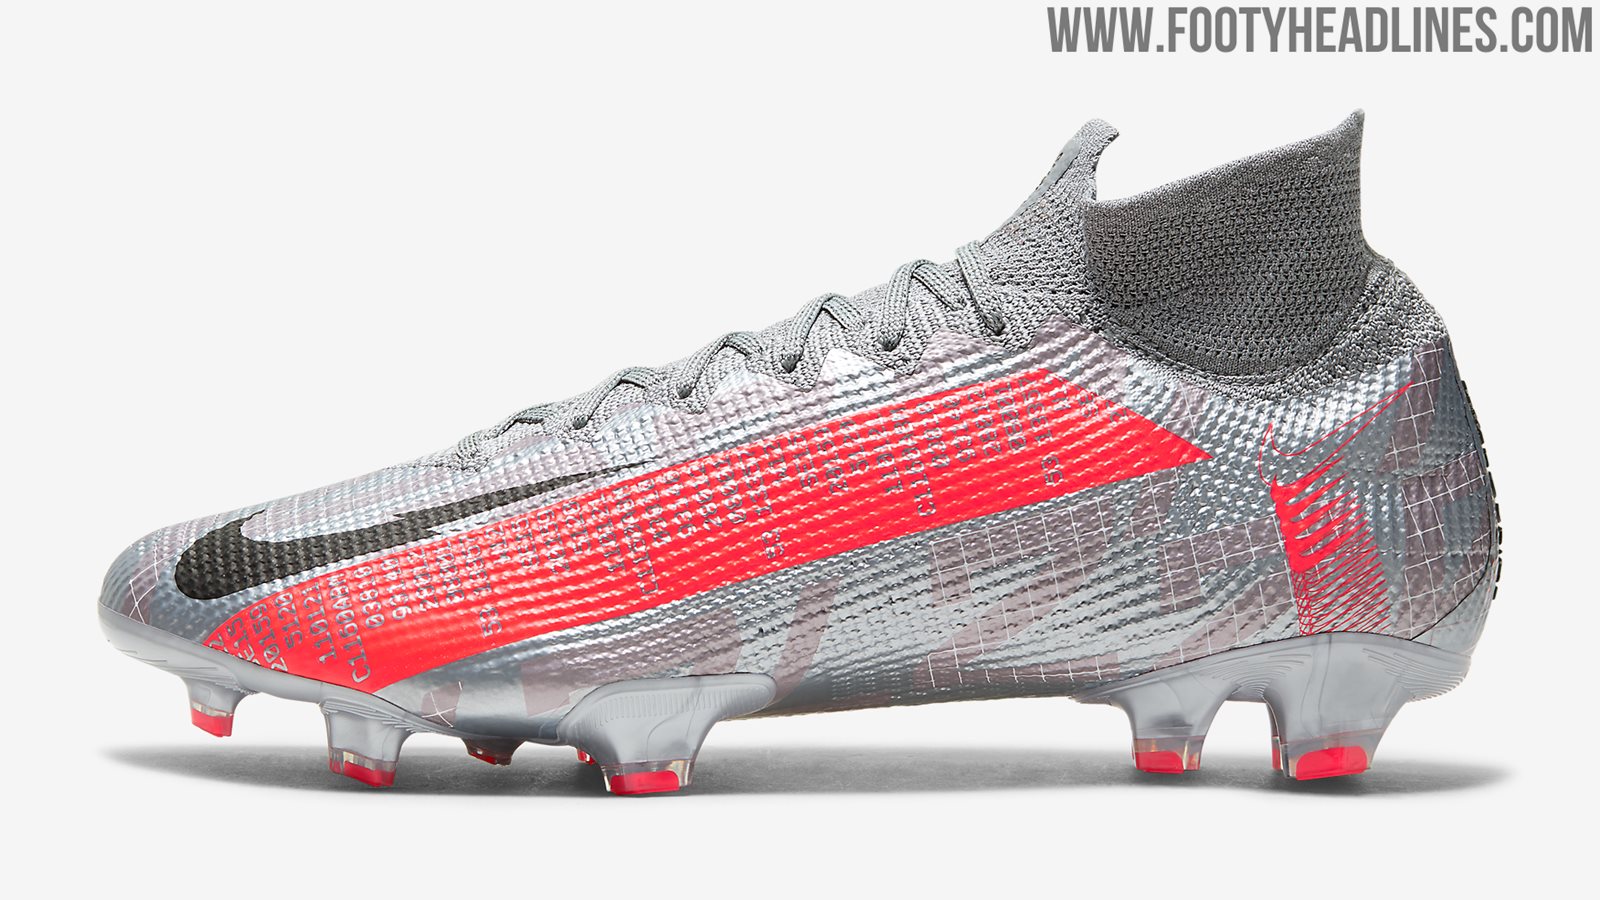 Next Gen Nike Mercurial Superfly 8 Vapor 14 Boots To Be Released In Early 21 Footy Headlines